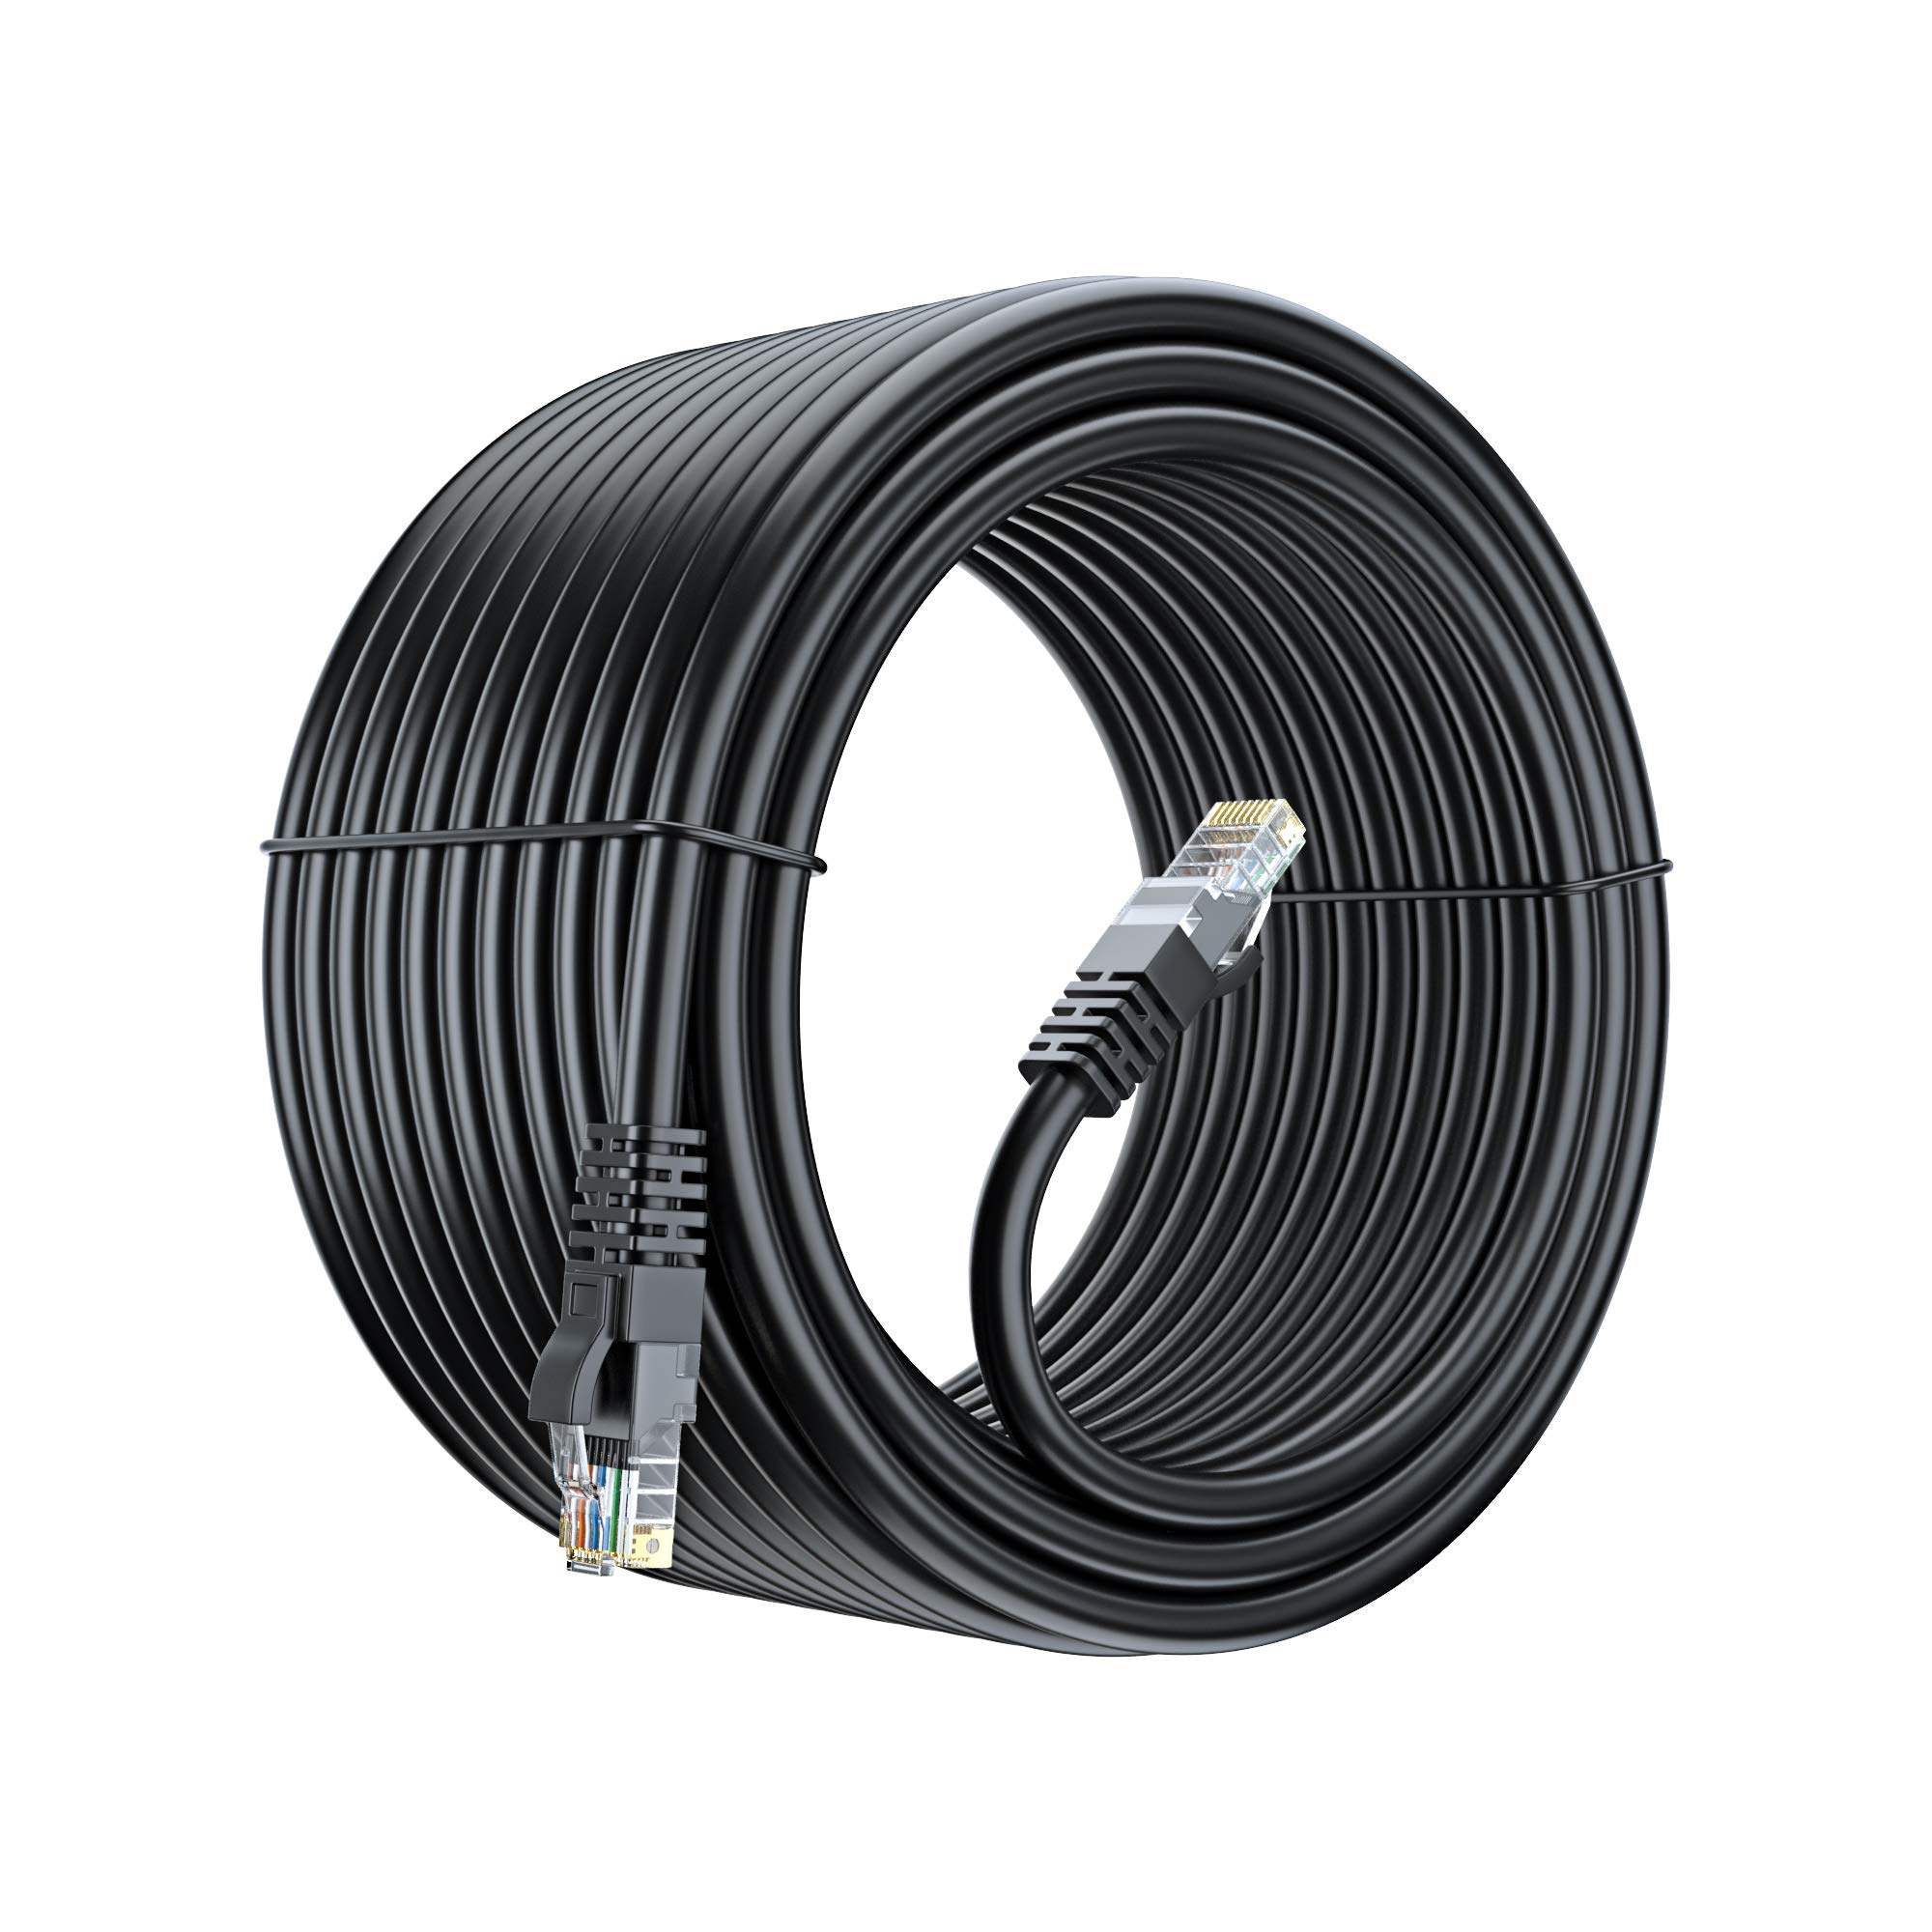 11 Best Cat 6 Ethernet Cable 100 Ft for 2023